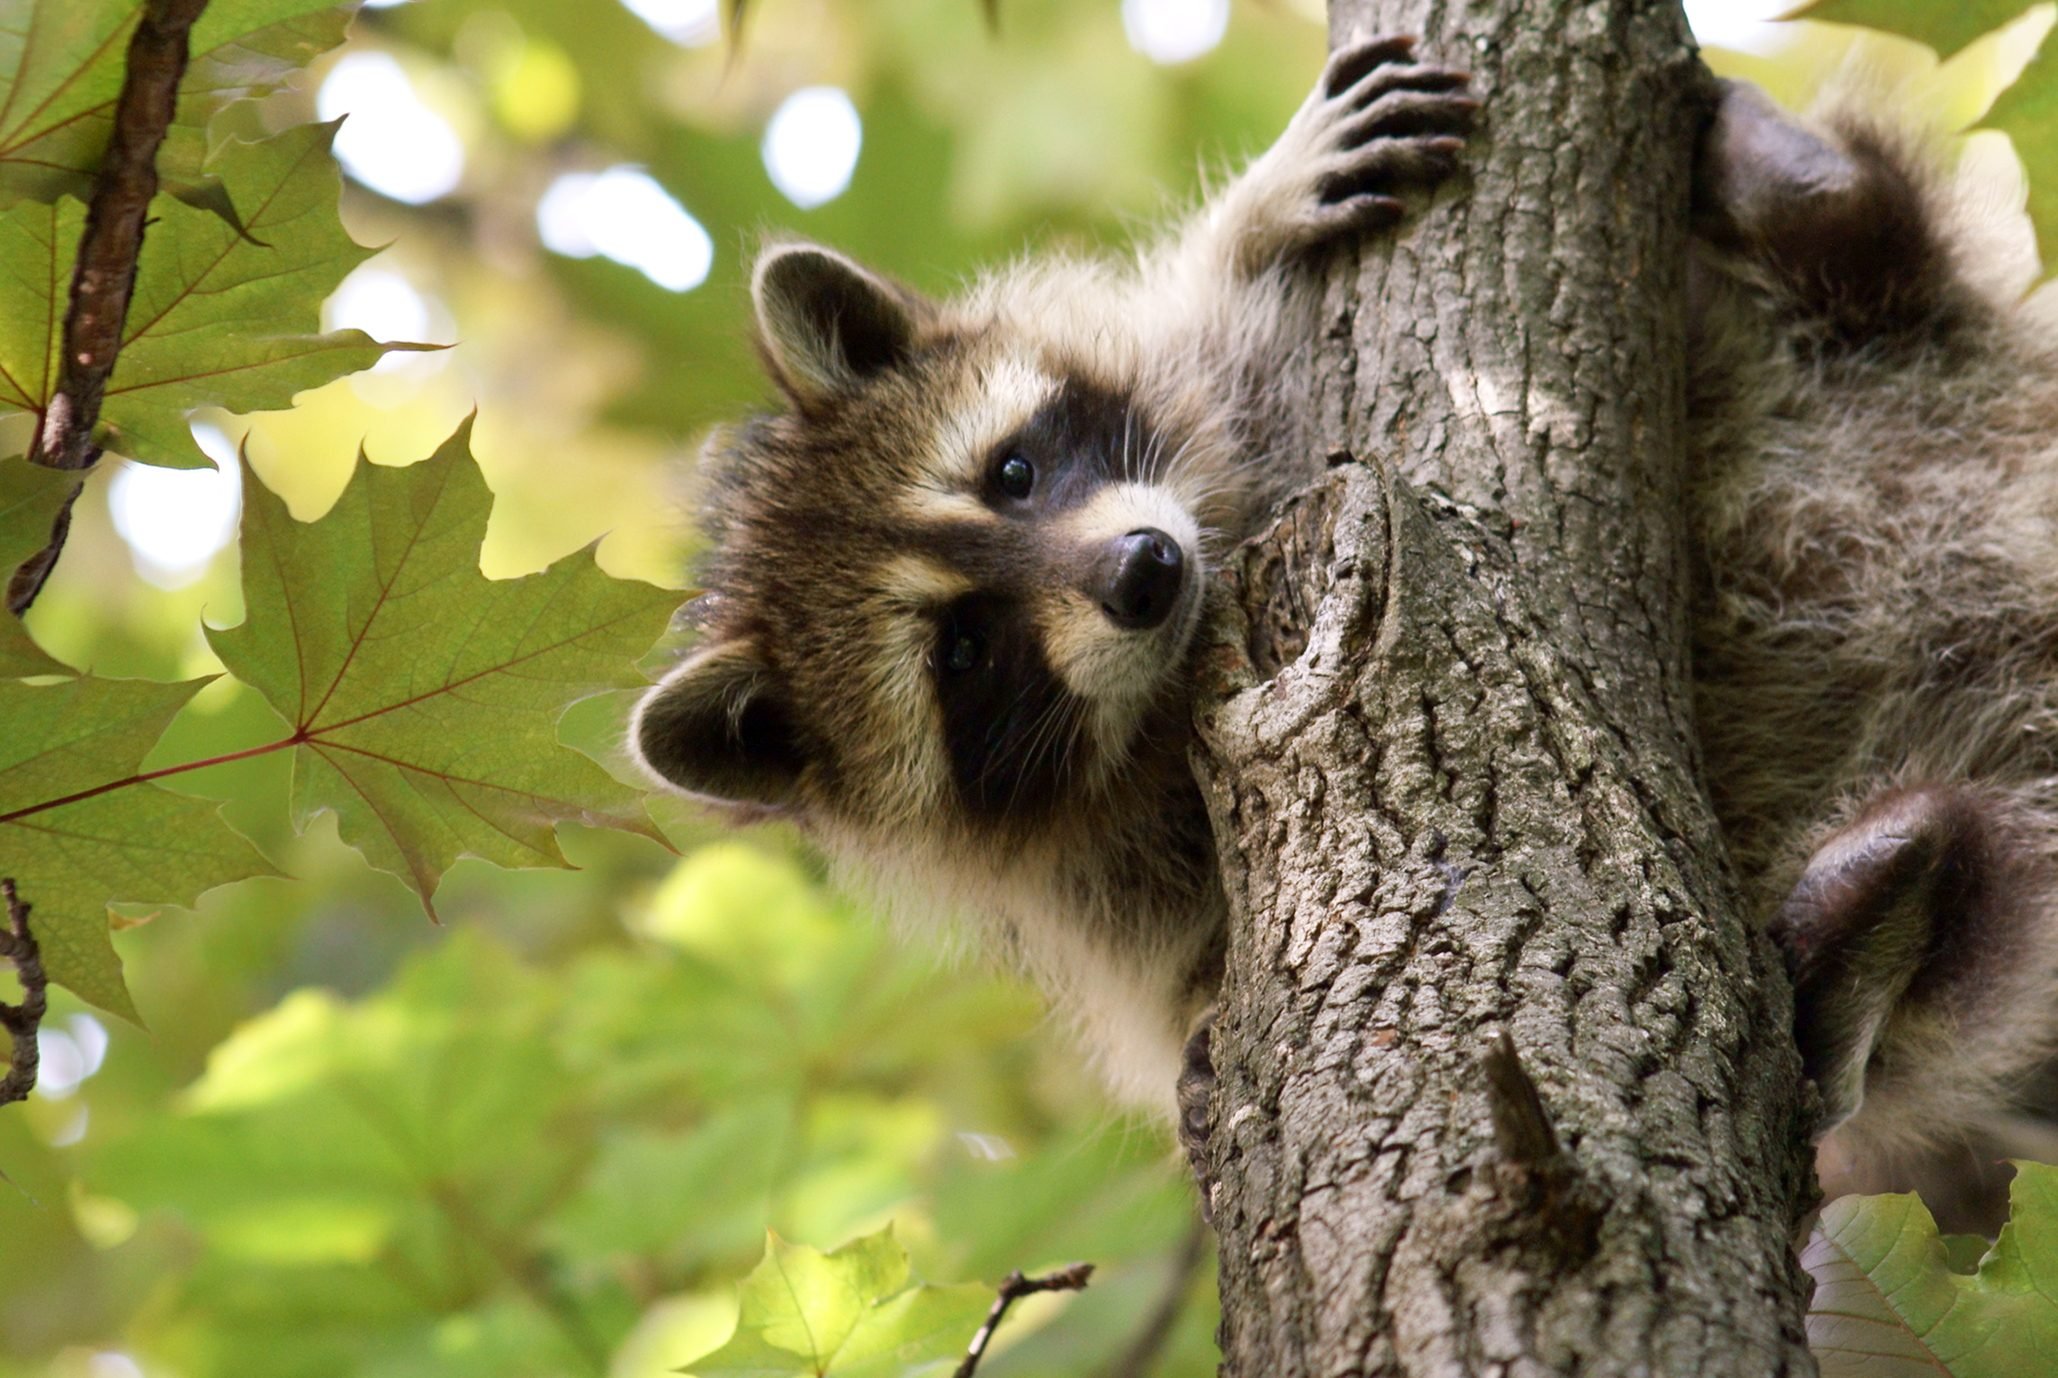 Baby raccoon holding on a tree with green leaves